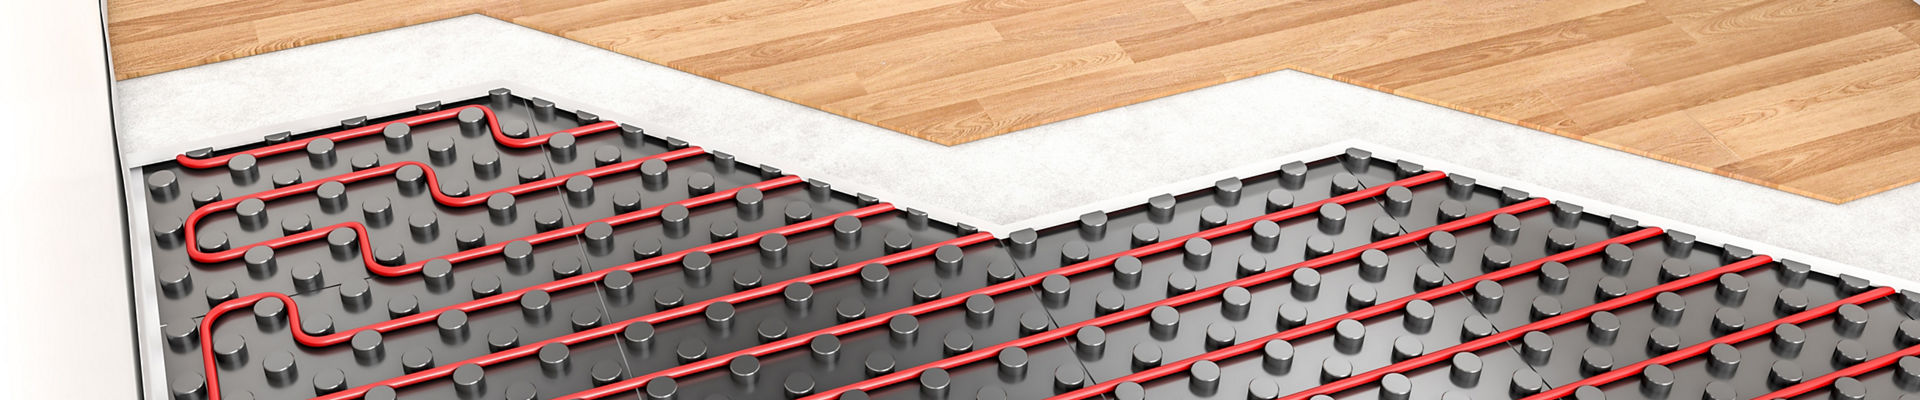 Plastic pipes for floor heating